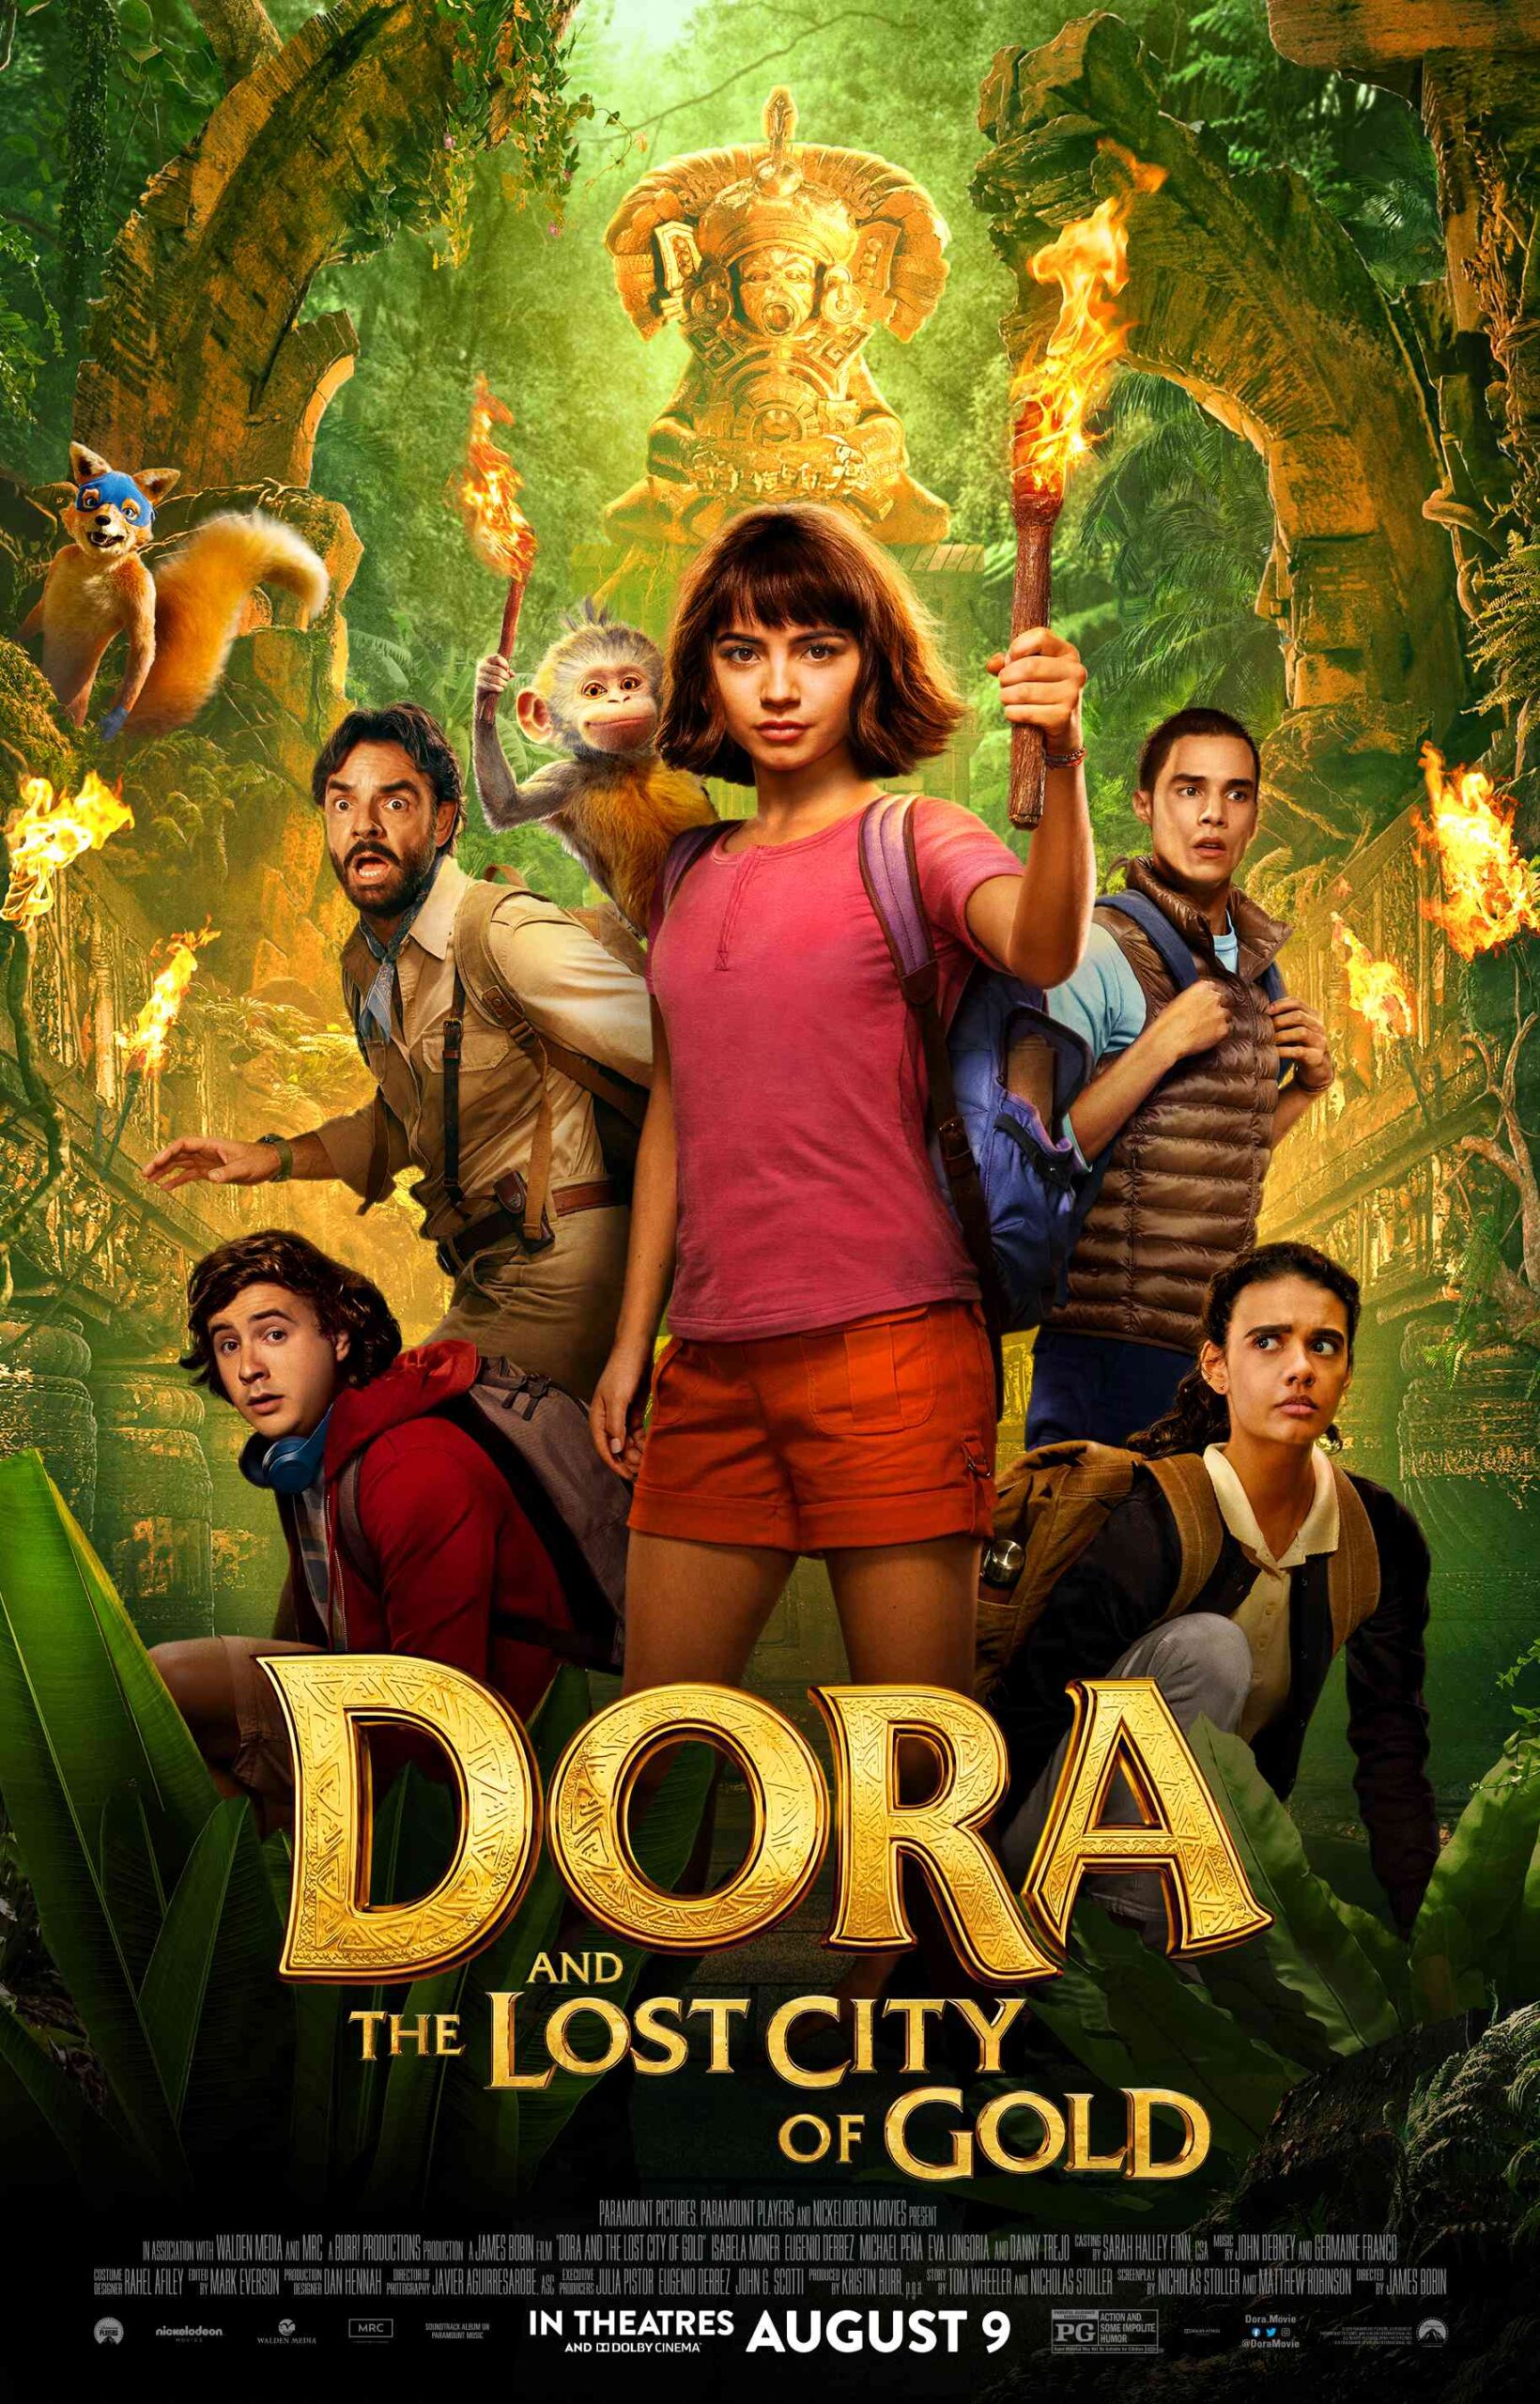 FULL MOVIE: Dora And The Lost City of Gold (2019)